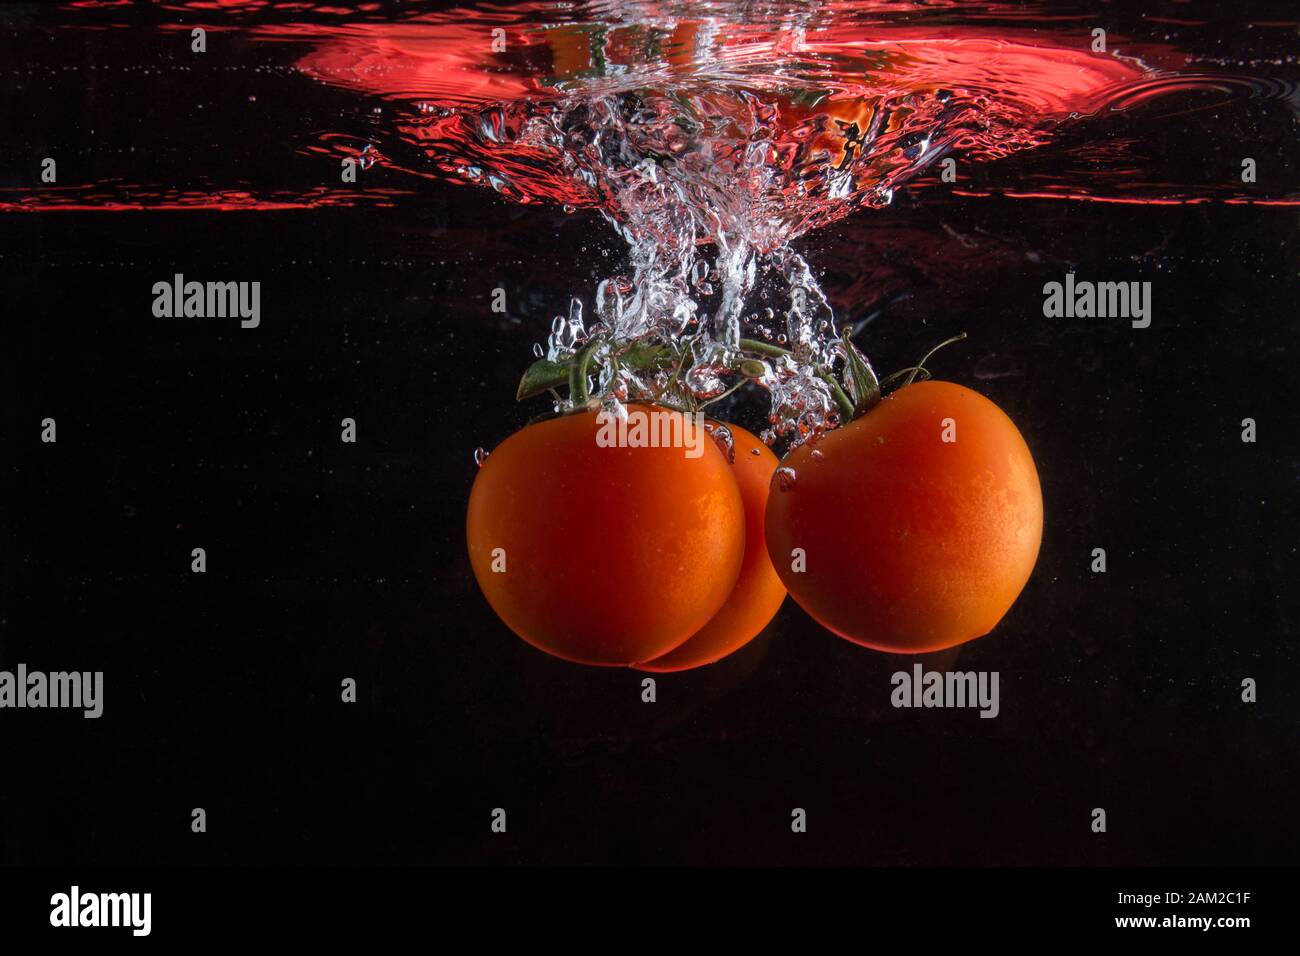 Tomatos falling in water with splash on black background Stock Photo